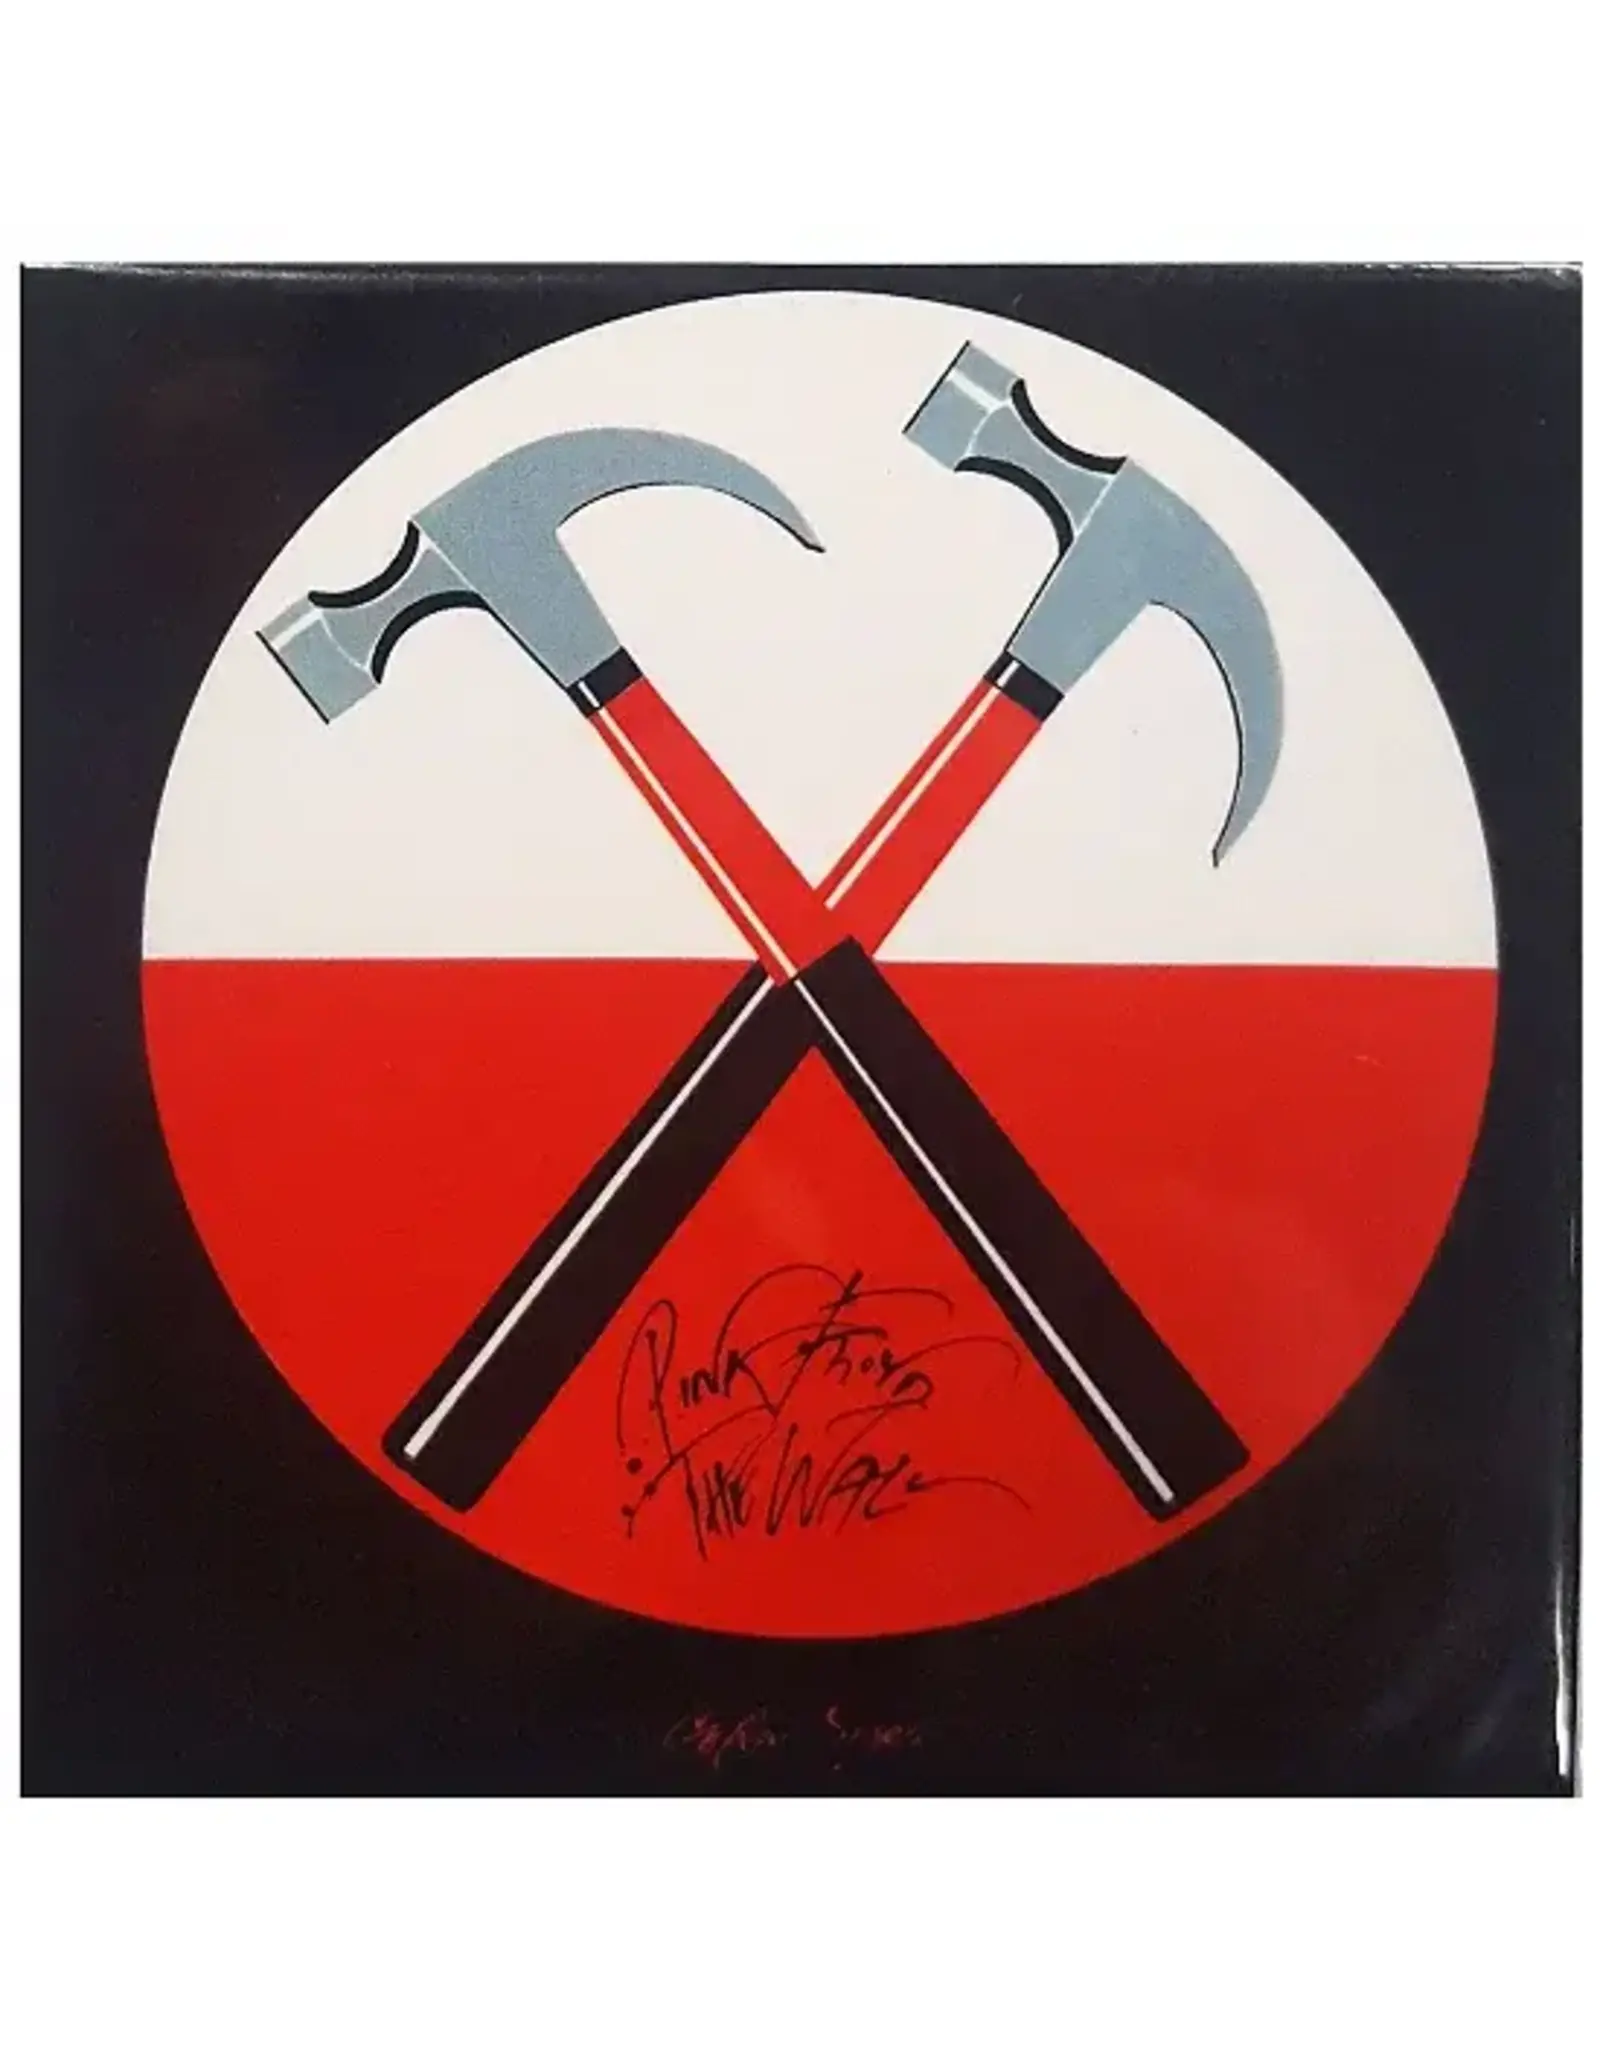 Pink Floyd / The Wall 'Hammers' Magnet